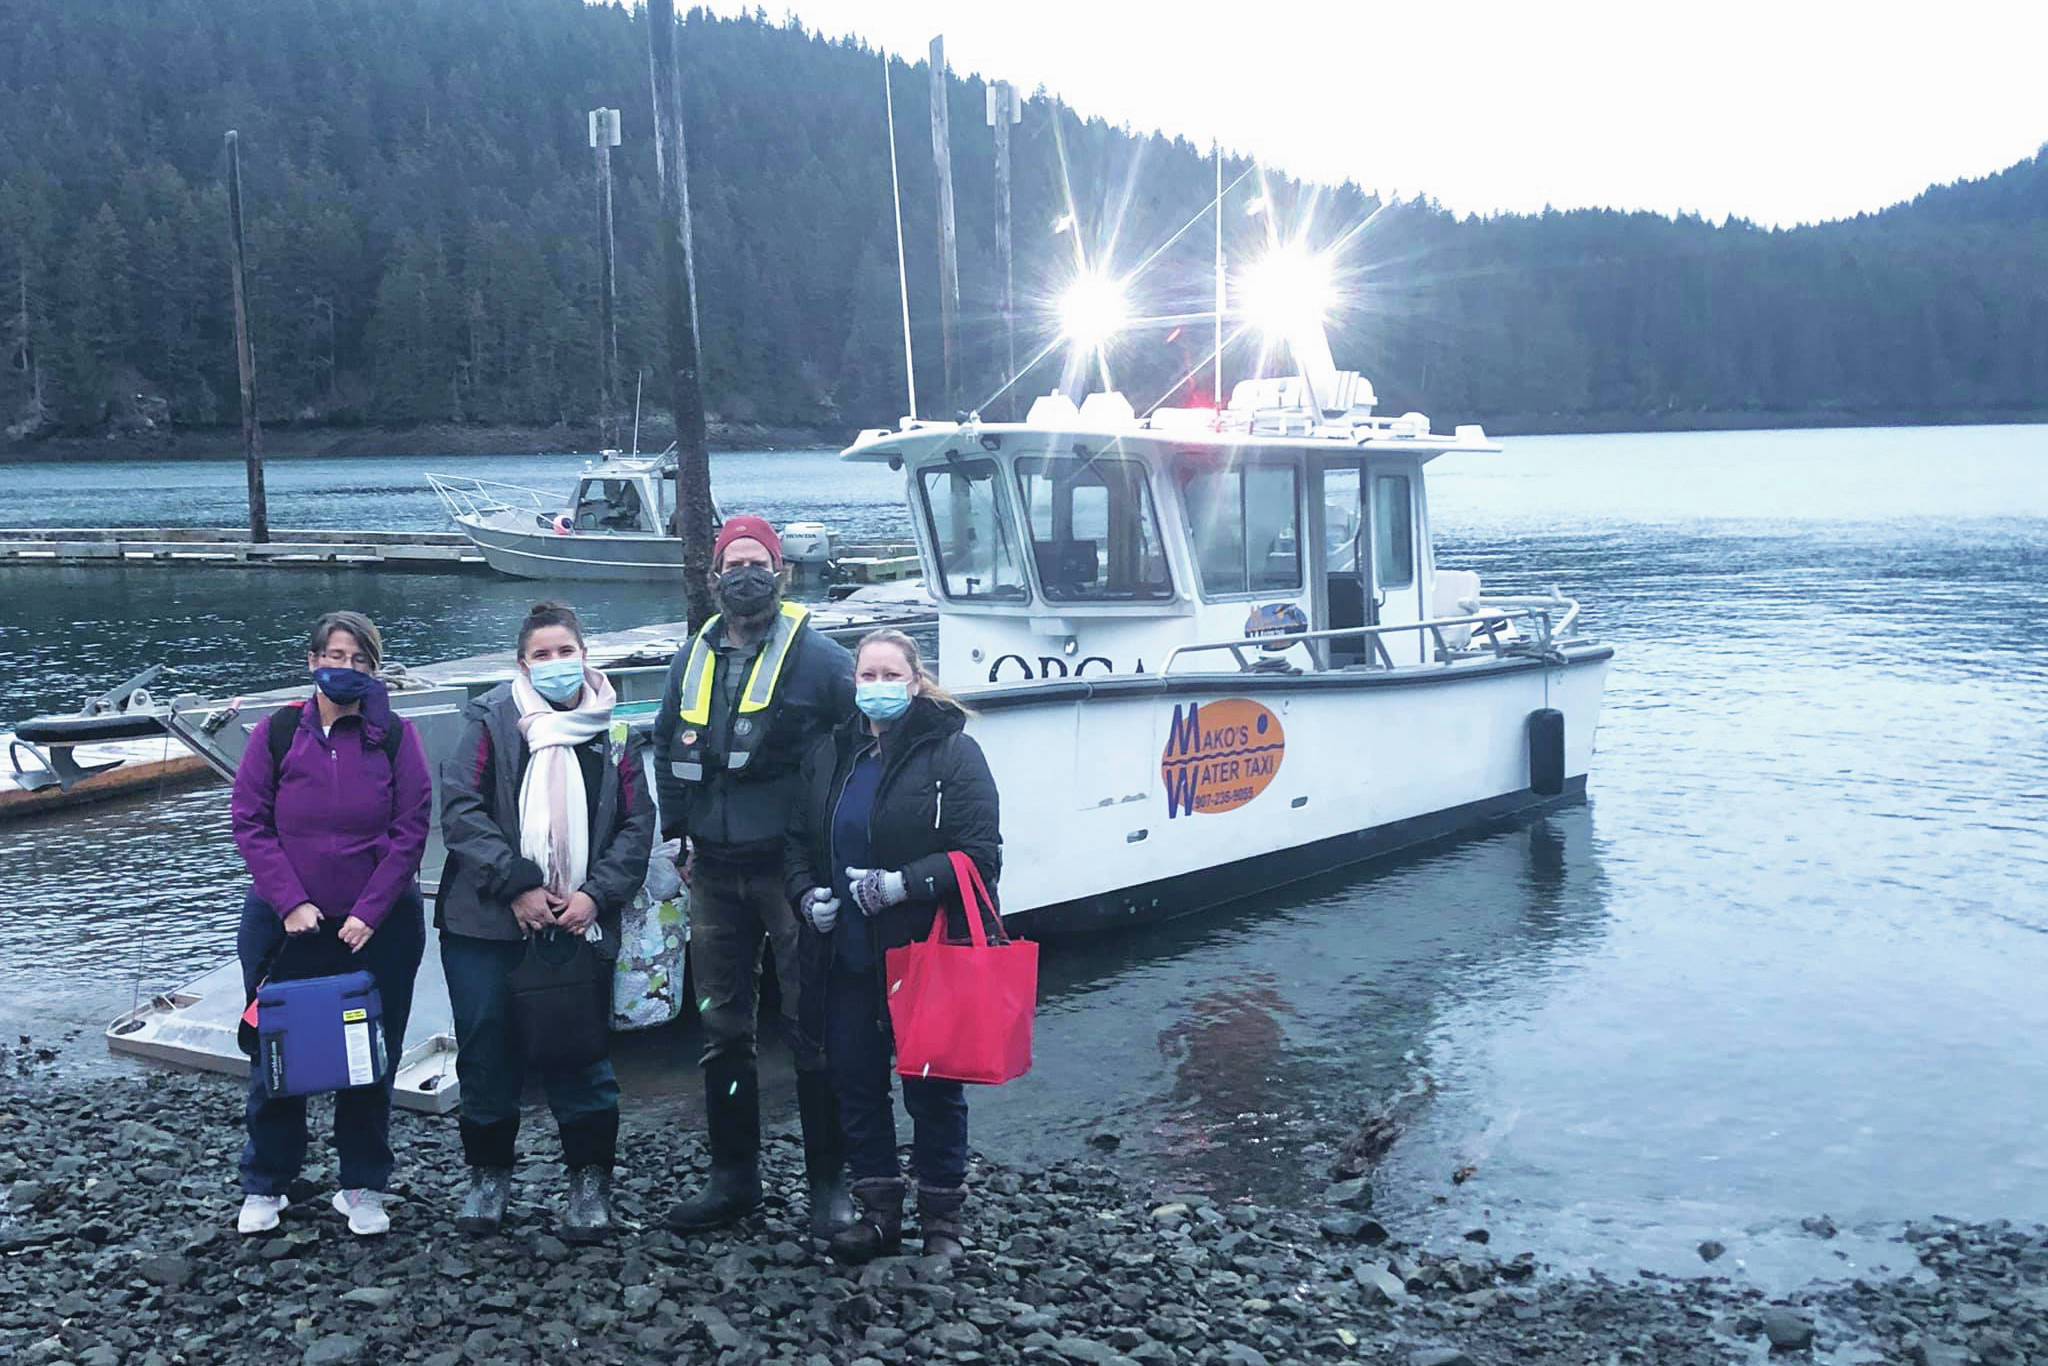 Curtis Jackson, second from right, poses on Thursday, Dec. 17, 2020, with SVT Heath & Wellness Center health care workers in Jakolof Bay, Alaska, after making a trip across Kachemak Bay from Homer to deliver the medical team and Pfizer COVID-19 vaccine. From left to right are nurse Candice Kreger, family nurse practitioner Kourtney Holder, Jackson, and family nurse practitioner Julie Drude. The health care workers then went by road to Seldovia. (Photo by Janel Harris courtesy of Mako's Water Taxi)